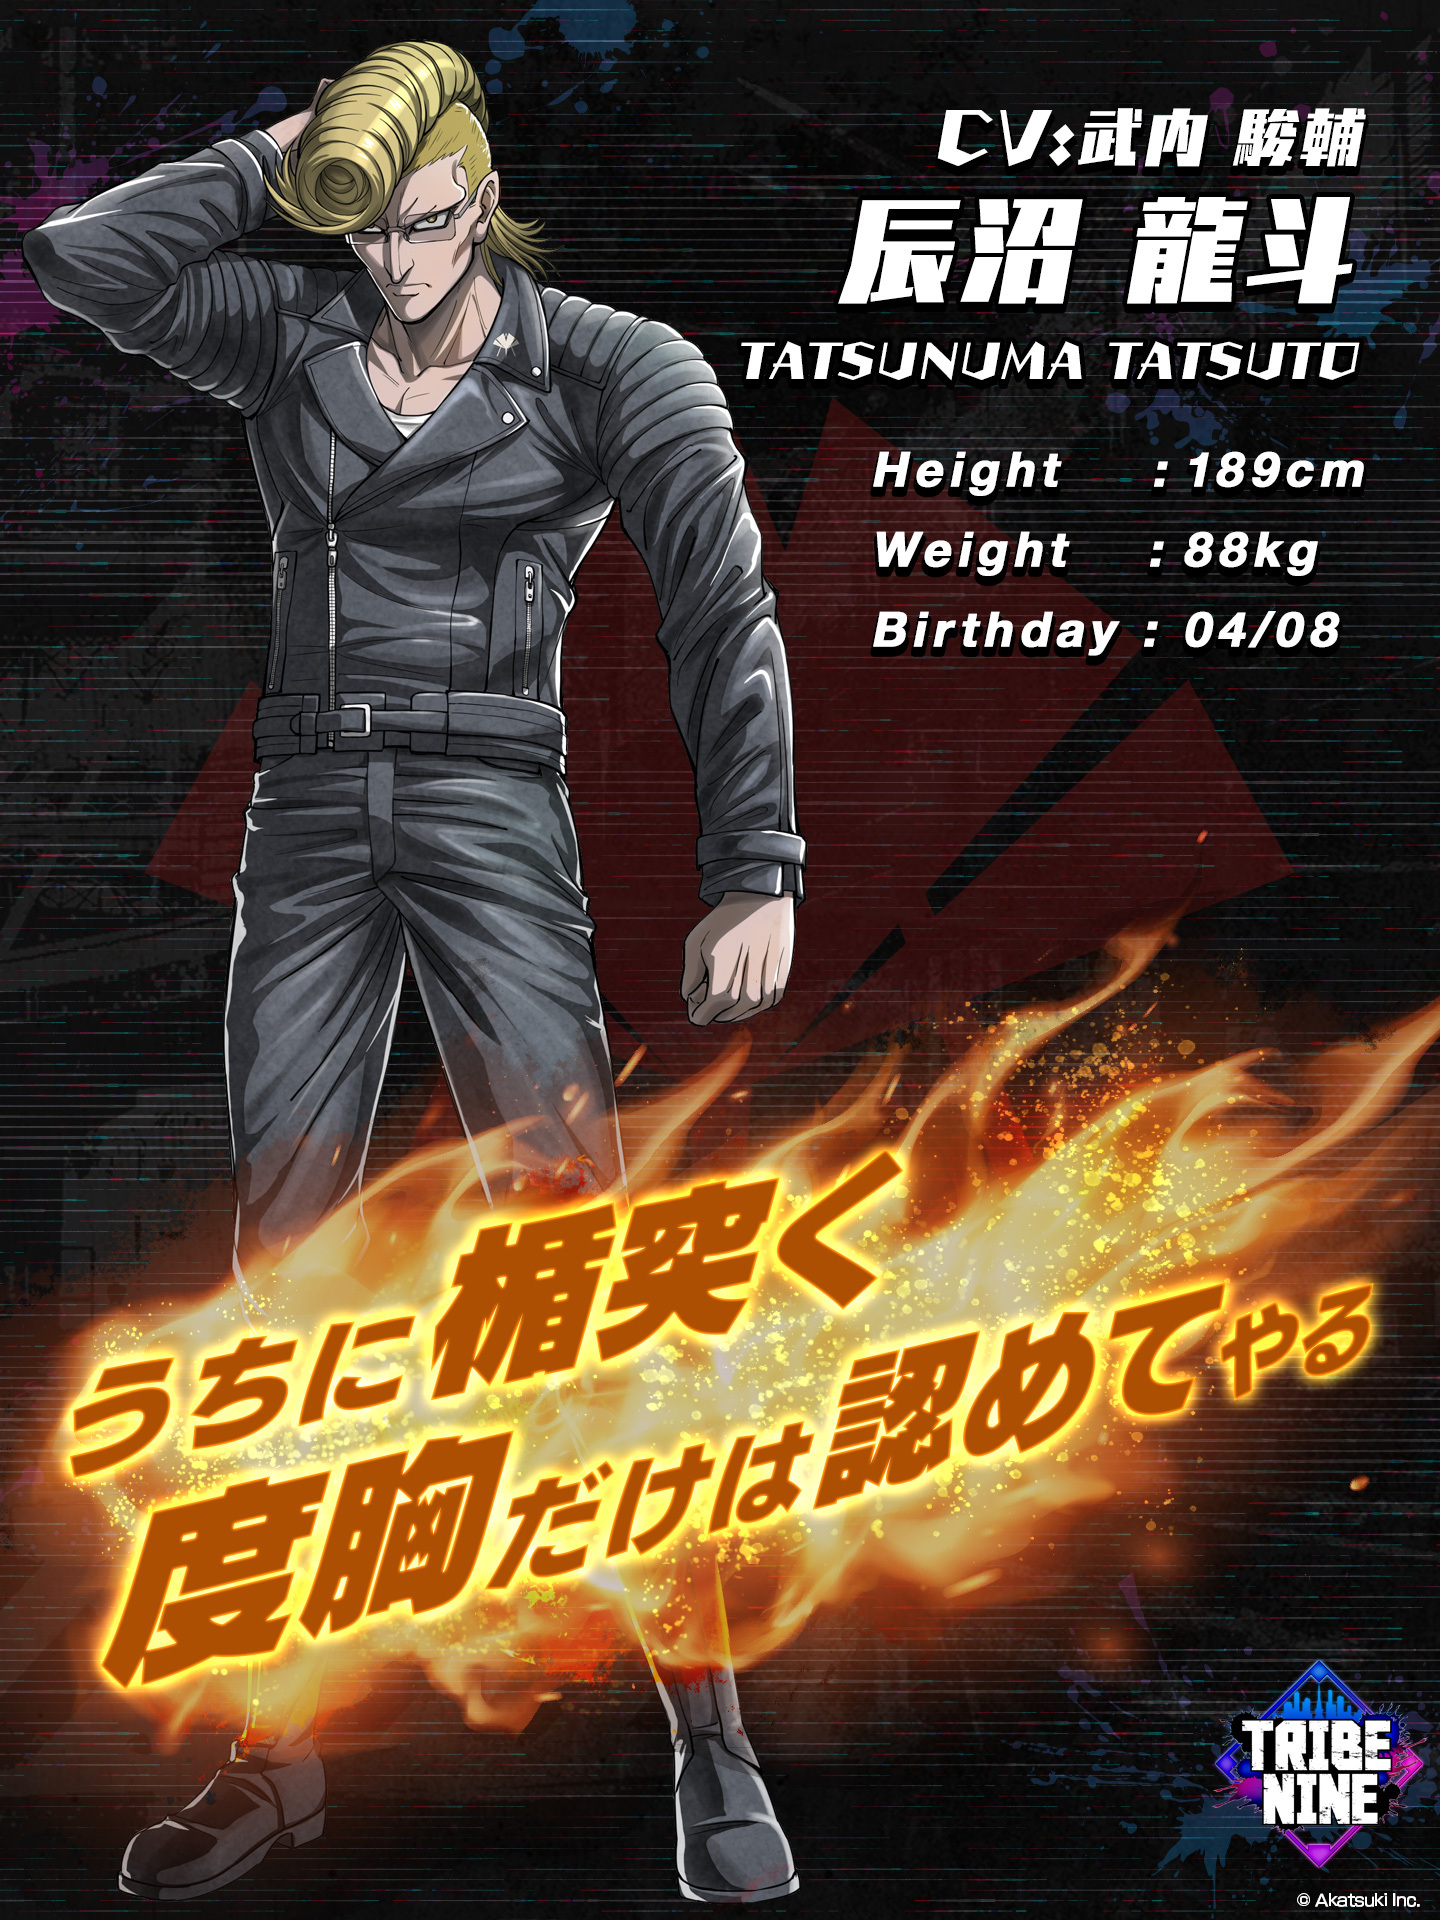 A character setting of Tatsuto Tatsunuma from the upcoming Tribe Nine TV anime. Tatsuto is a tall, intimidating young man with a blonde regent pompadour hair cut. He wears motorcycle leathers and boots.